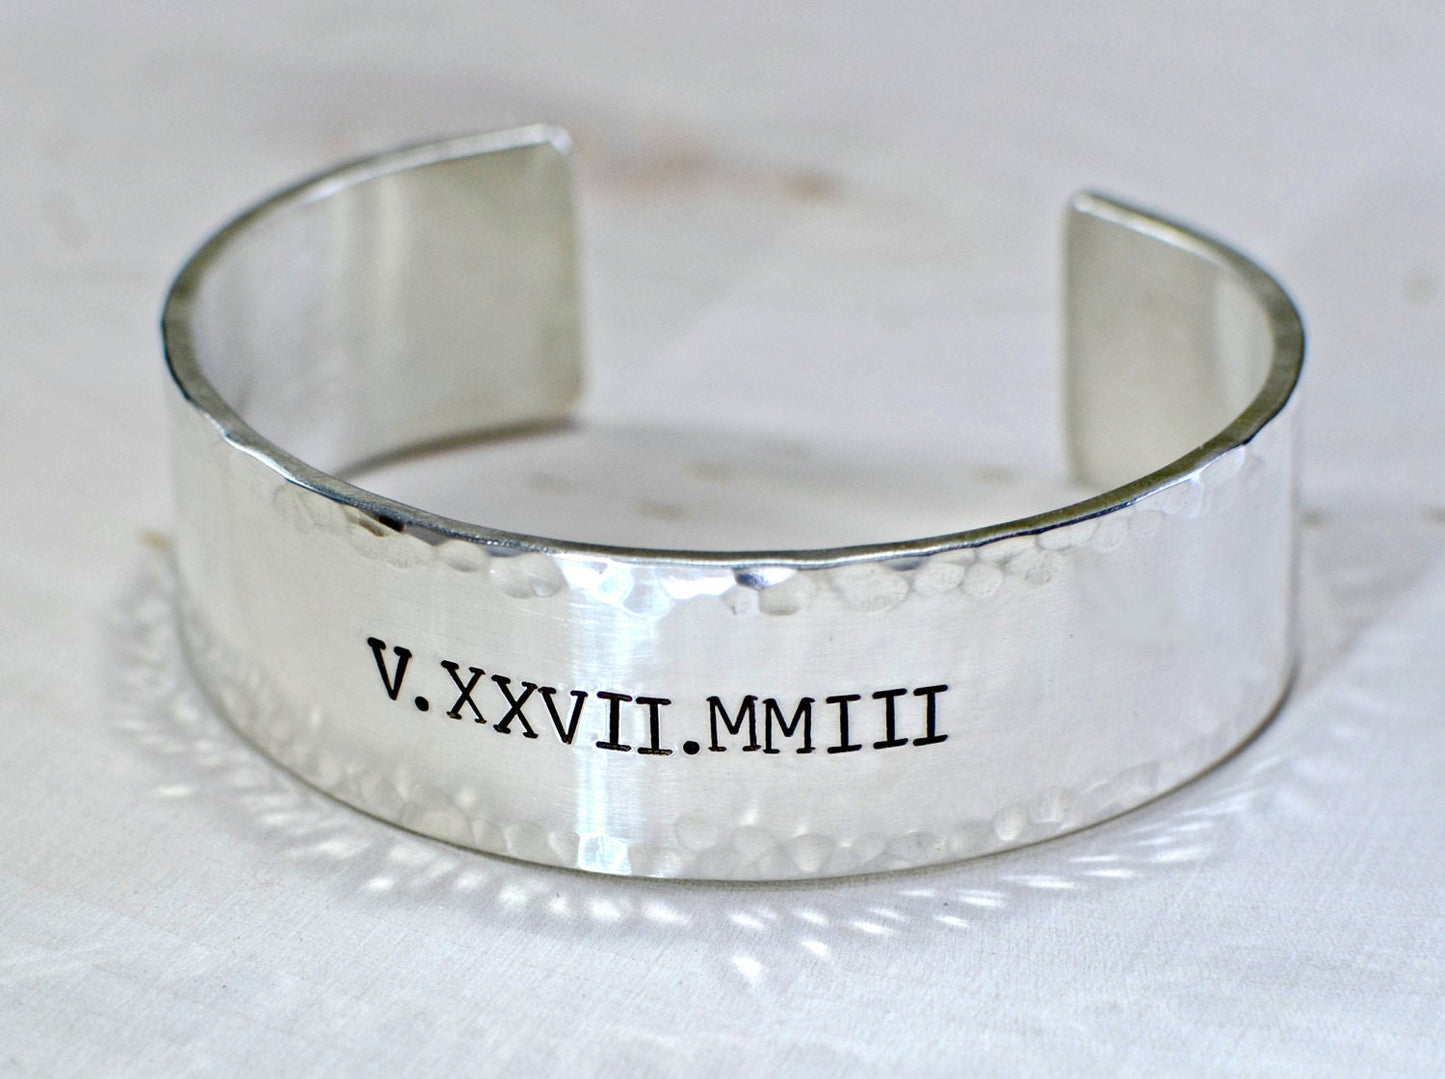 Chunky Style Roman Numeral Sterling Silver Bracelet with Hammered Edges